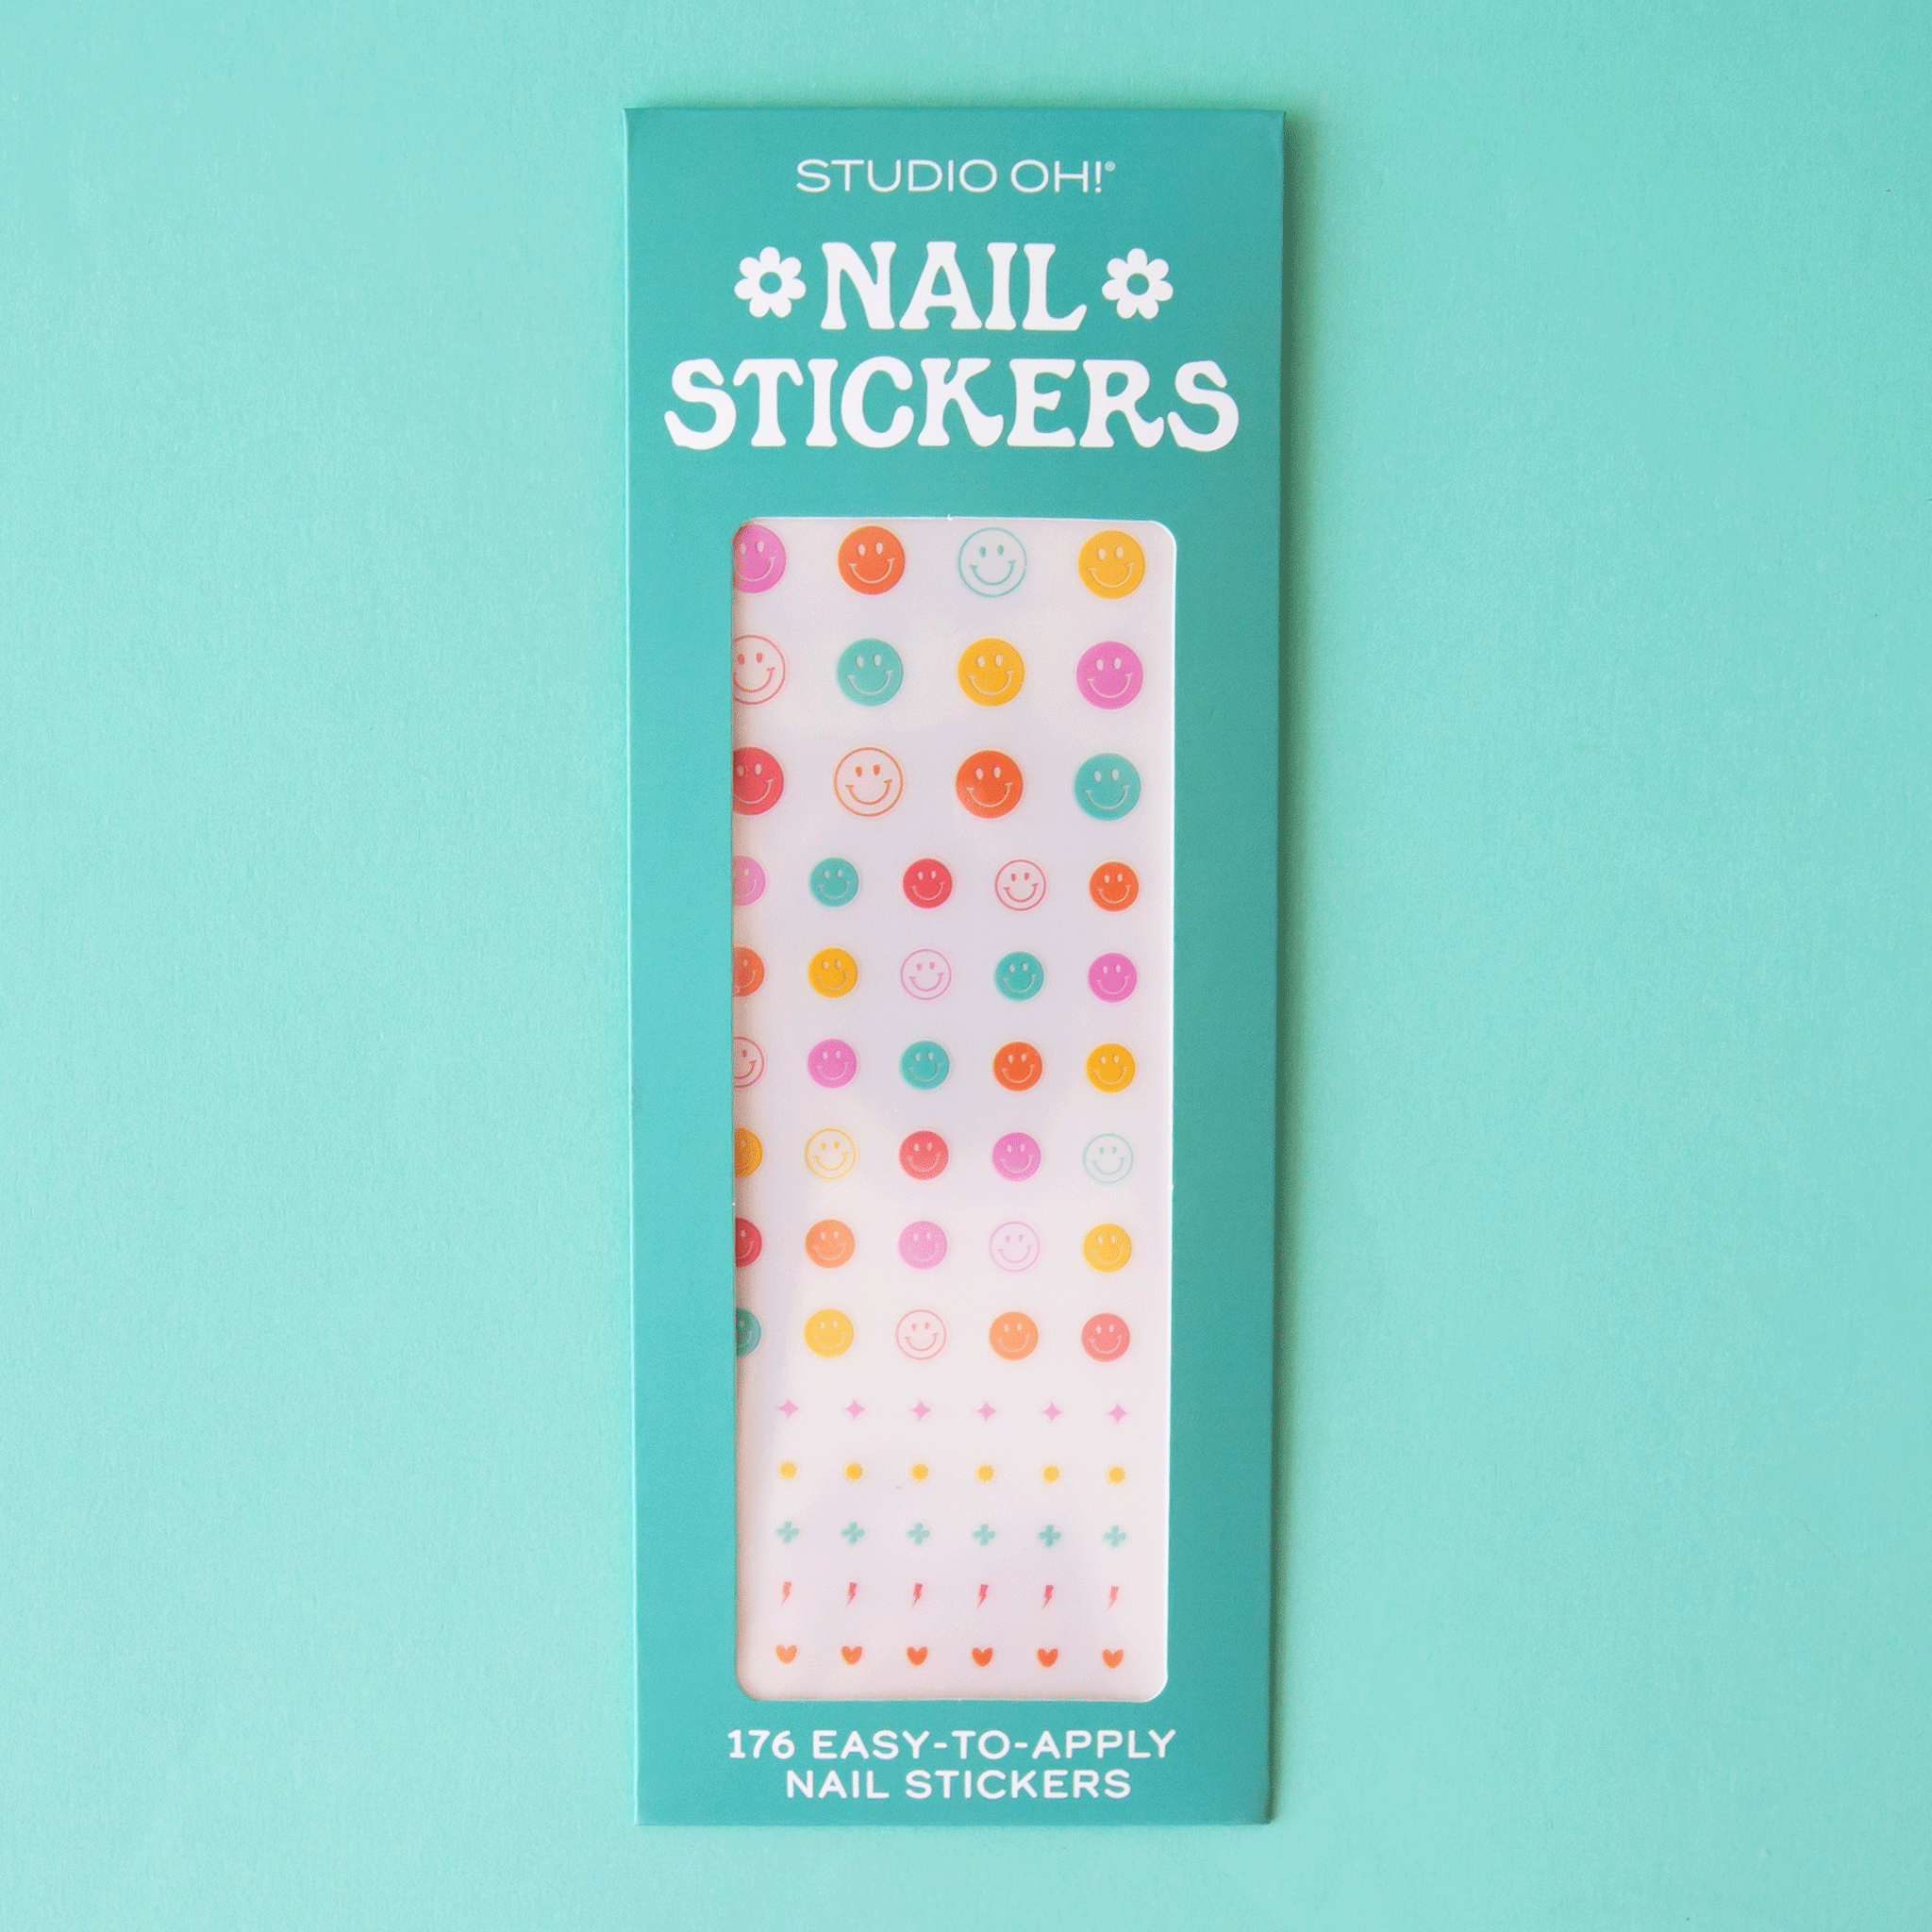 On an aqua background is a pack of nail stickers in multi-colored smiley faces.